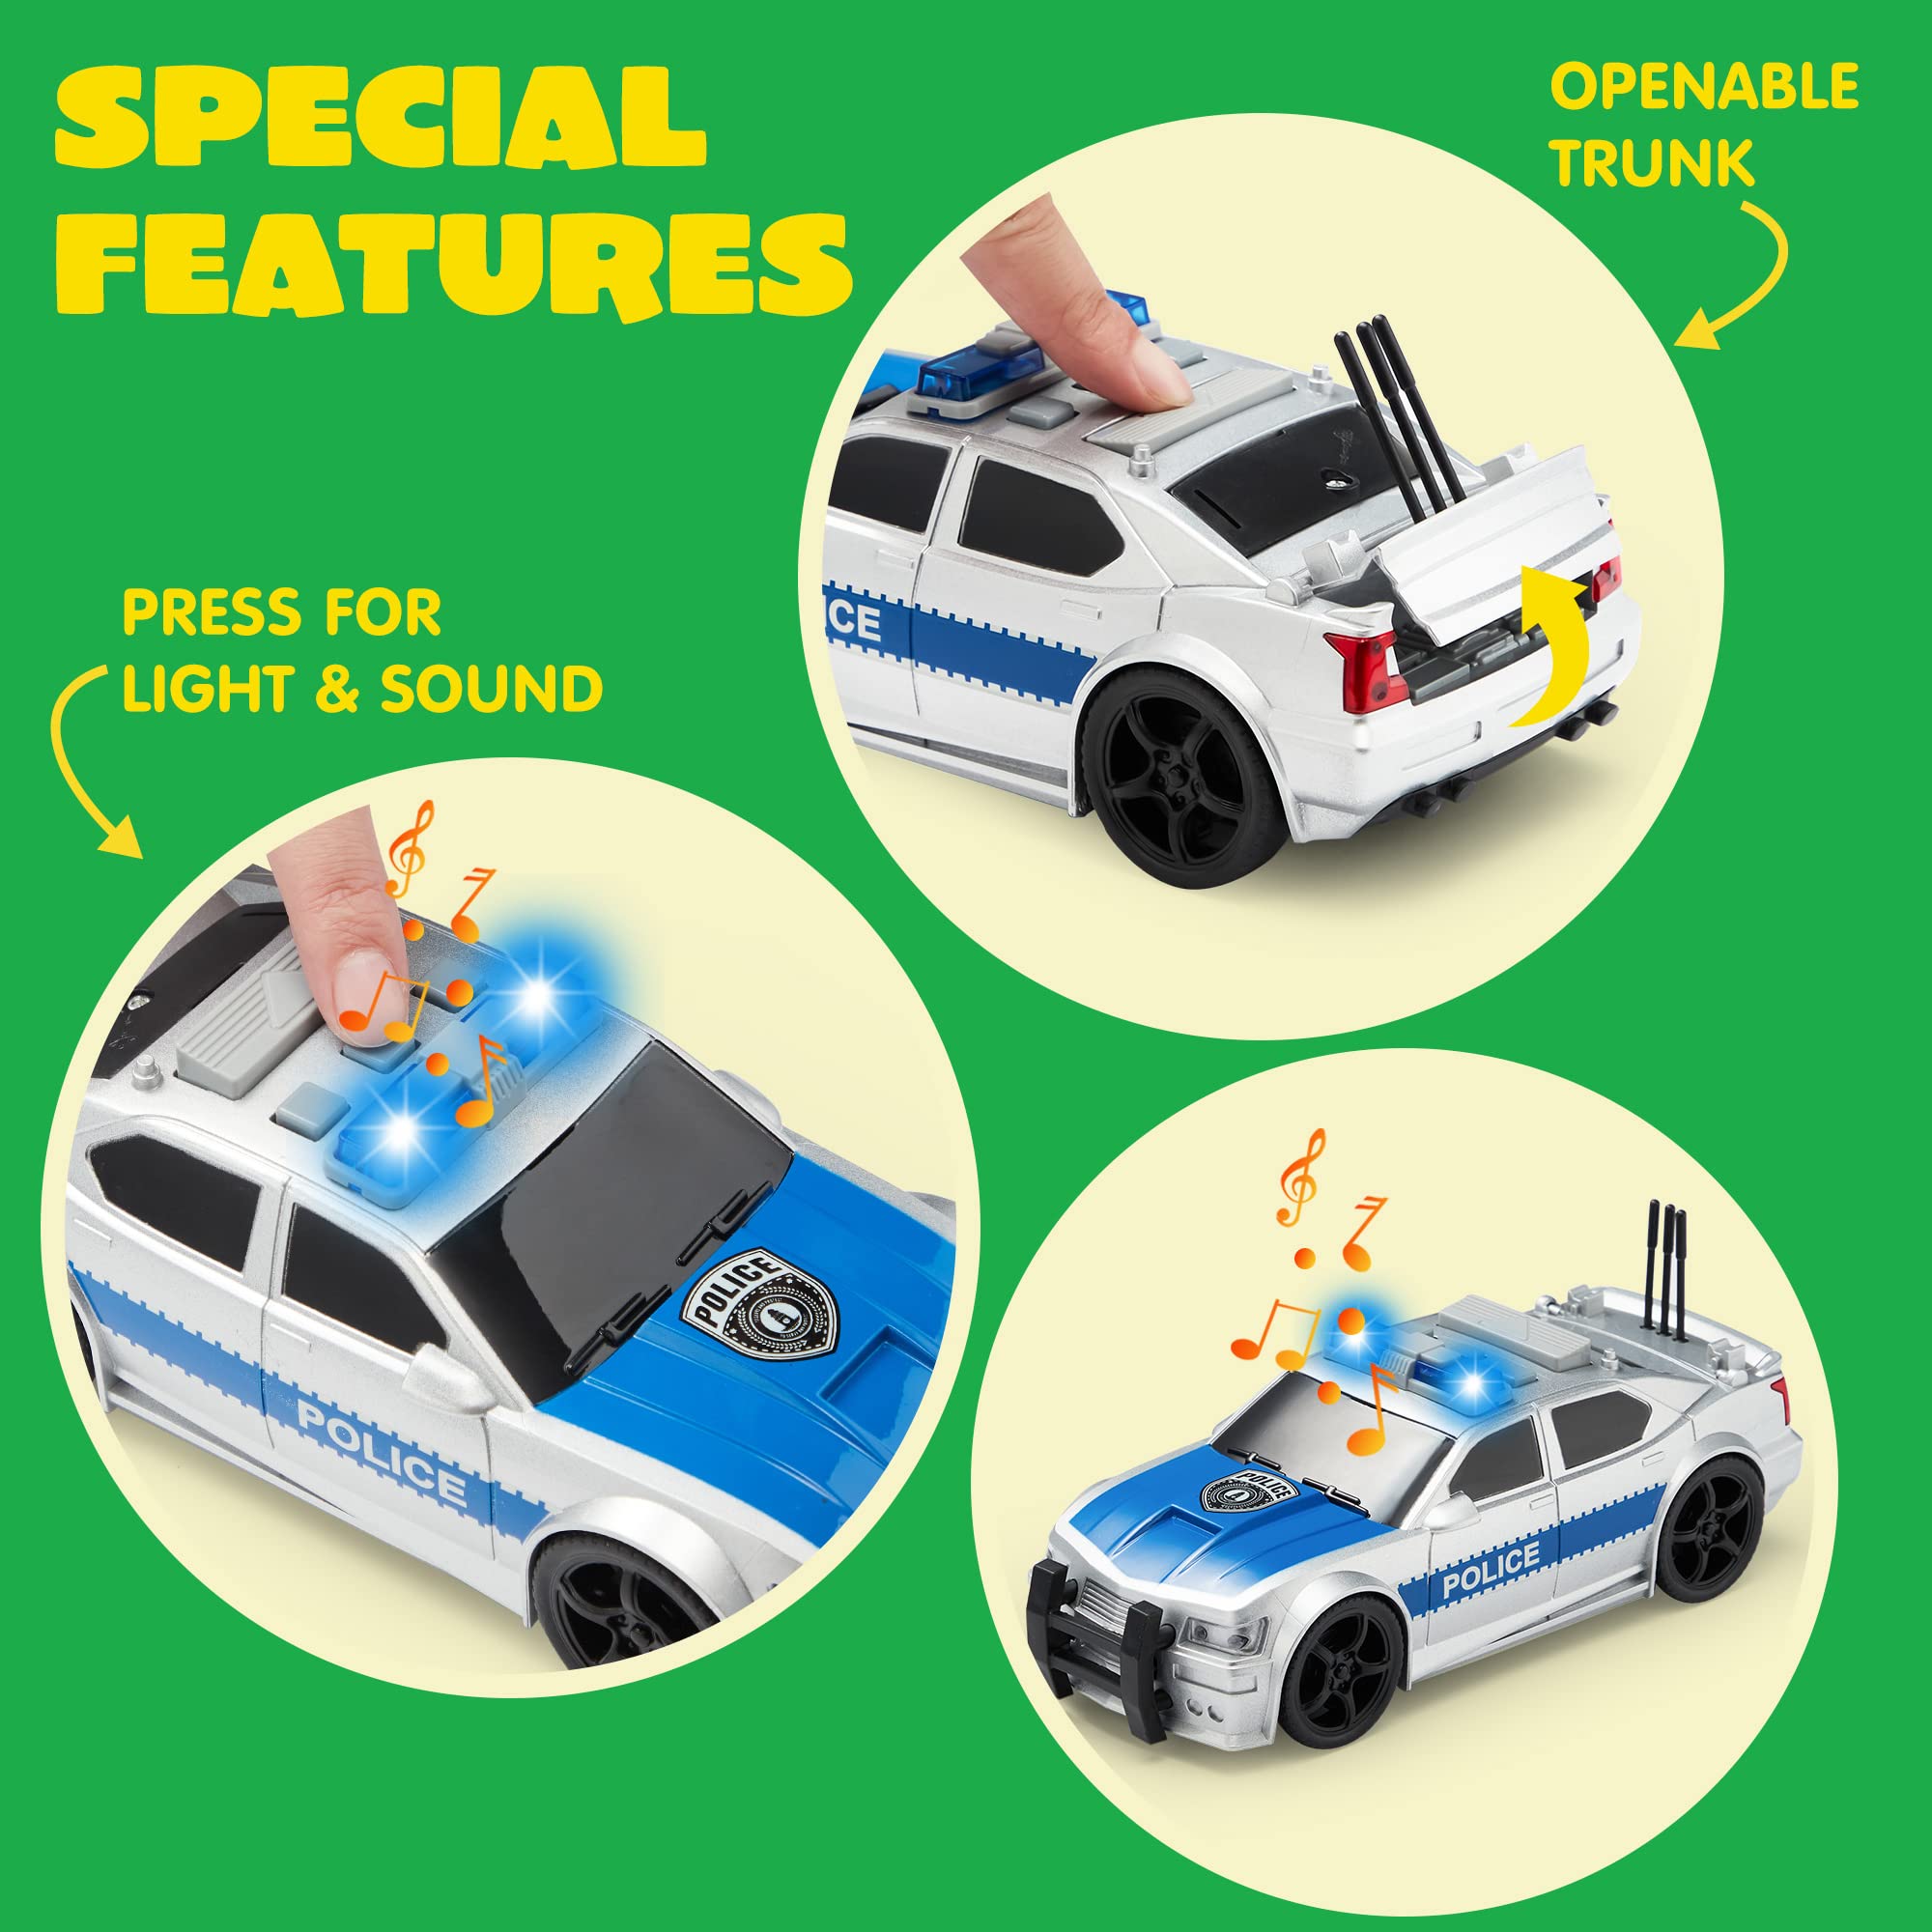 JOYIN 4 Pcs 7" Long Vehicle Toy Set, Toddlers Cars with Lights and Siren Sound, Including Play Police Car, School Bus, Toy Garbage Truck, Ambulance Toy, Birthday Party Gifts Toys for Boys 3-5